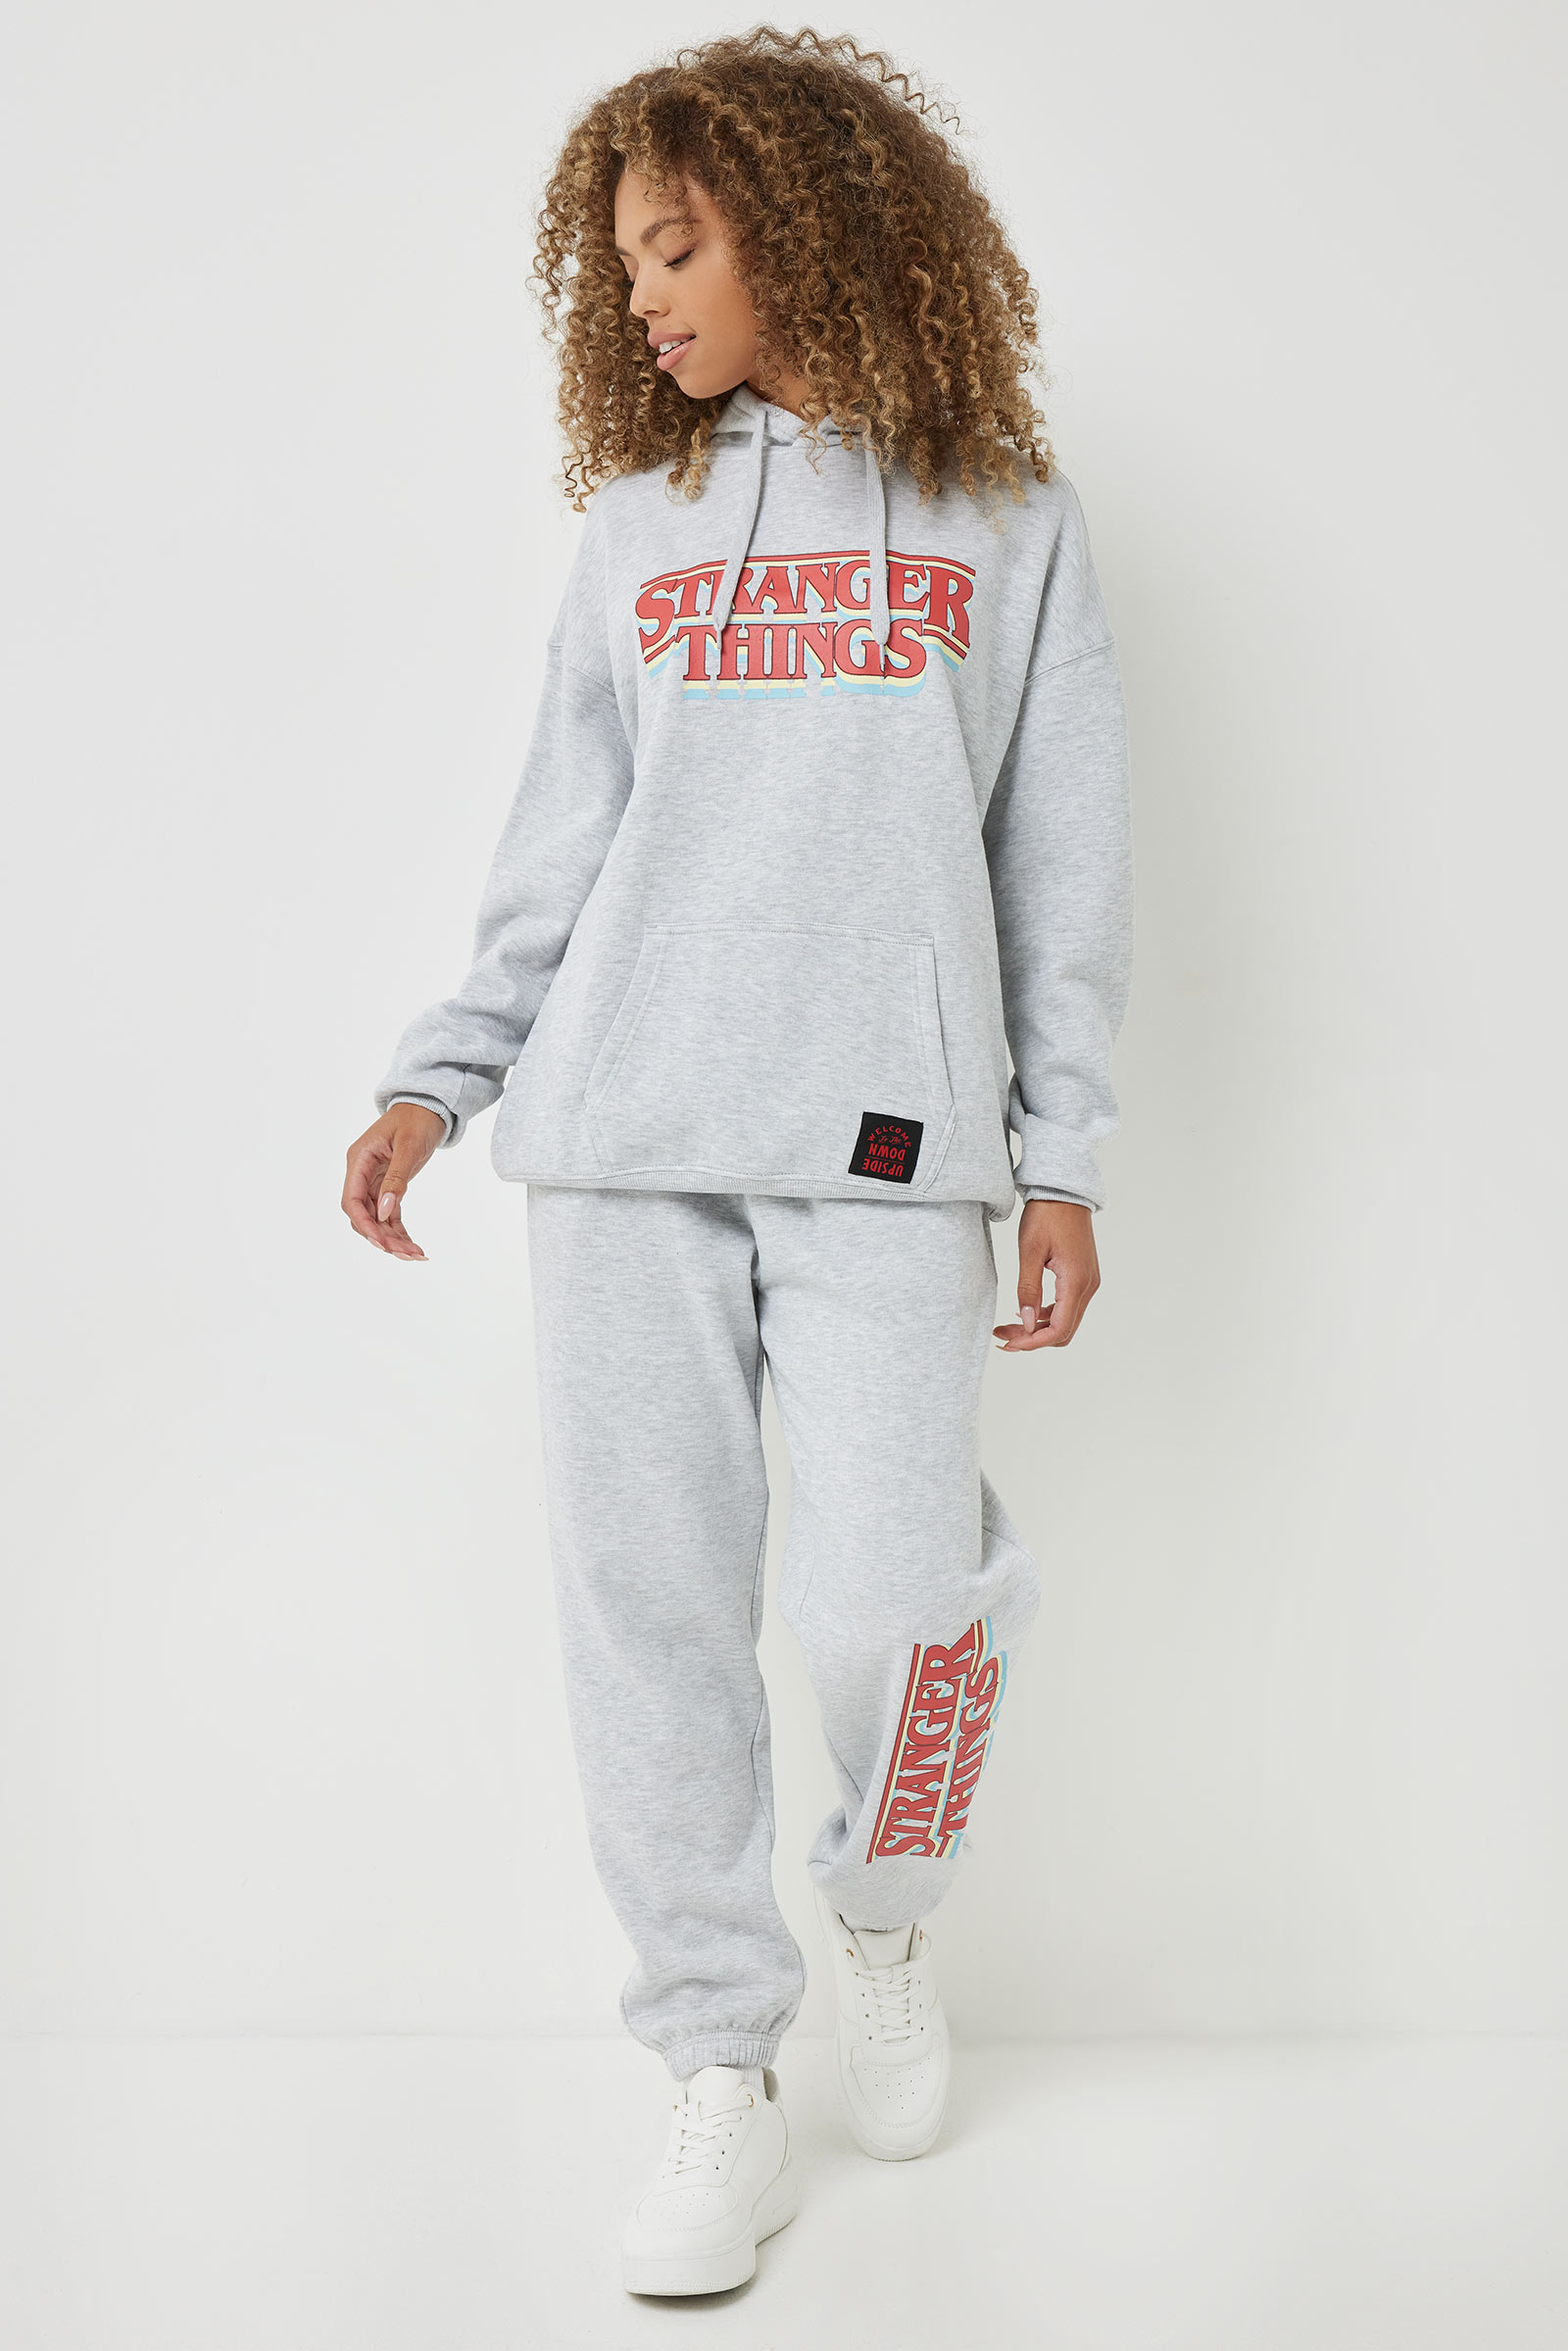 Ardene Stranger Things Sweatpants in Light Grey | Size Large | Polyester/Cotton | Fleece-Lined